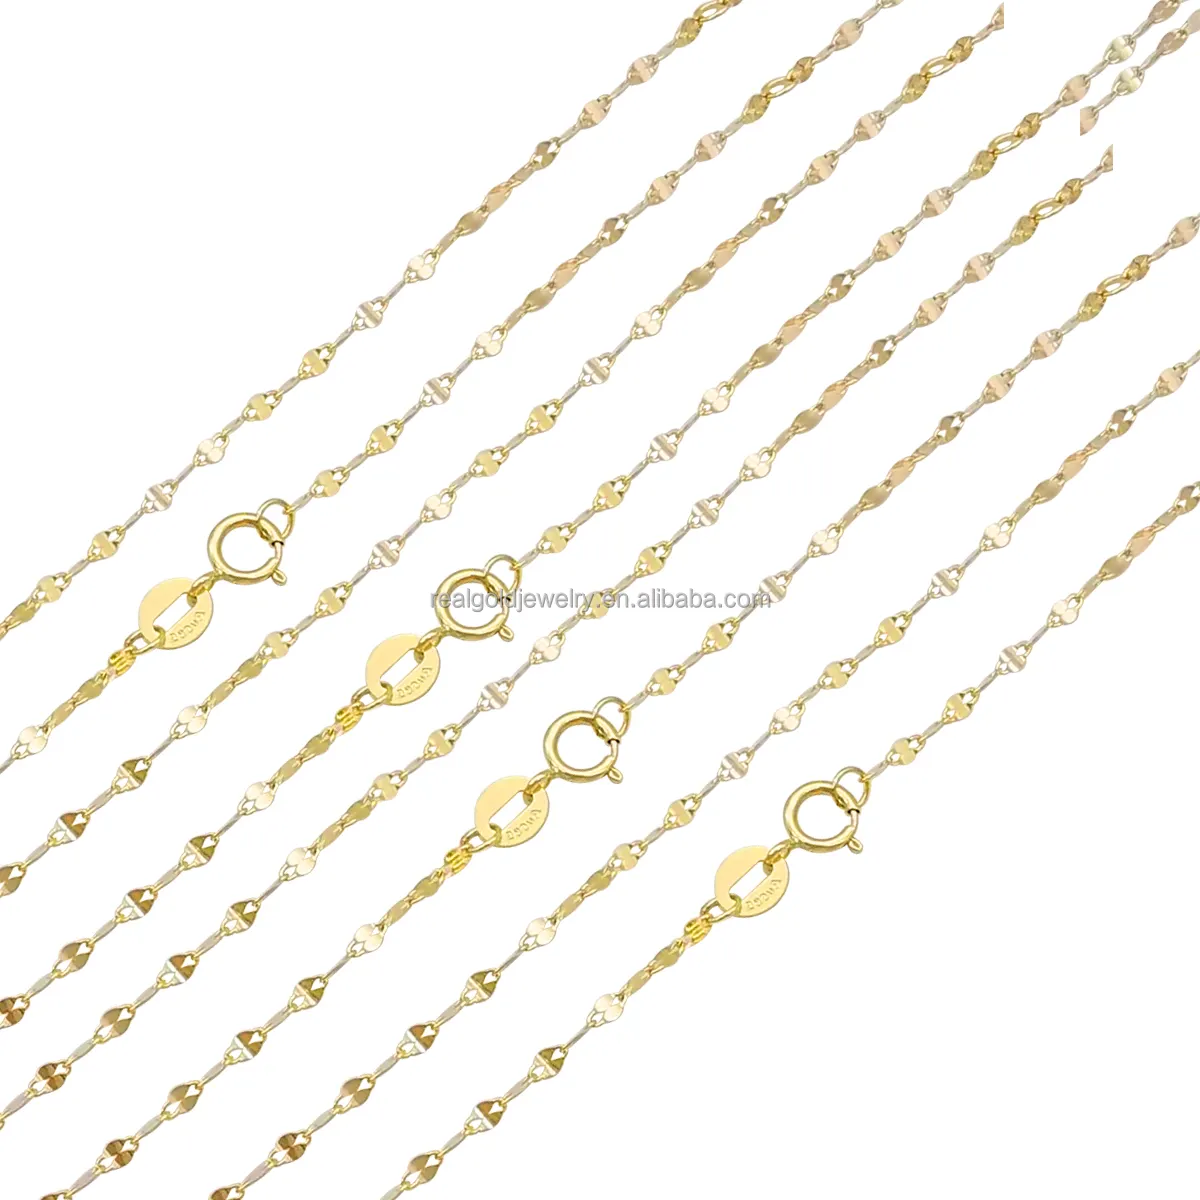 Wholesale Fashion New Arrivals Solid 14K 18K Pure Gold 14K Real Gold Thickness 1.7mm Lip Chain Necklace Jewelry For Women Men